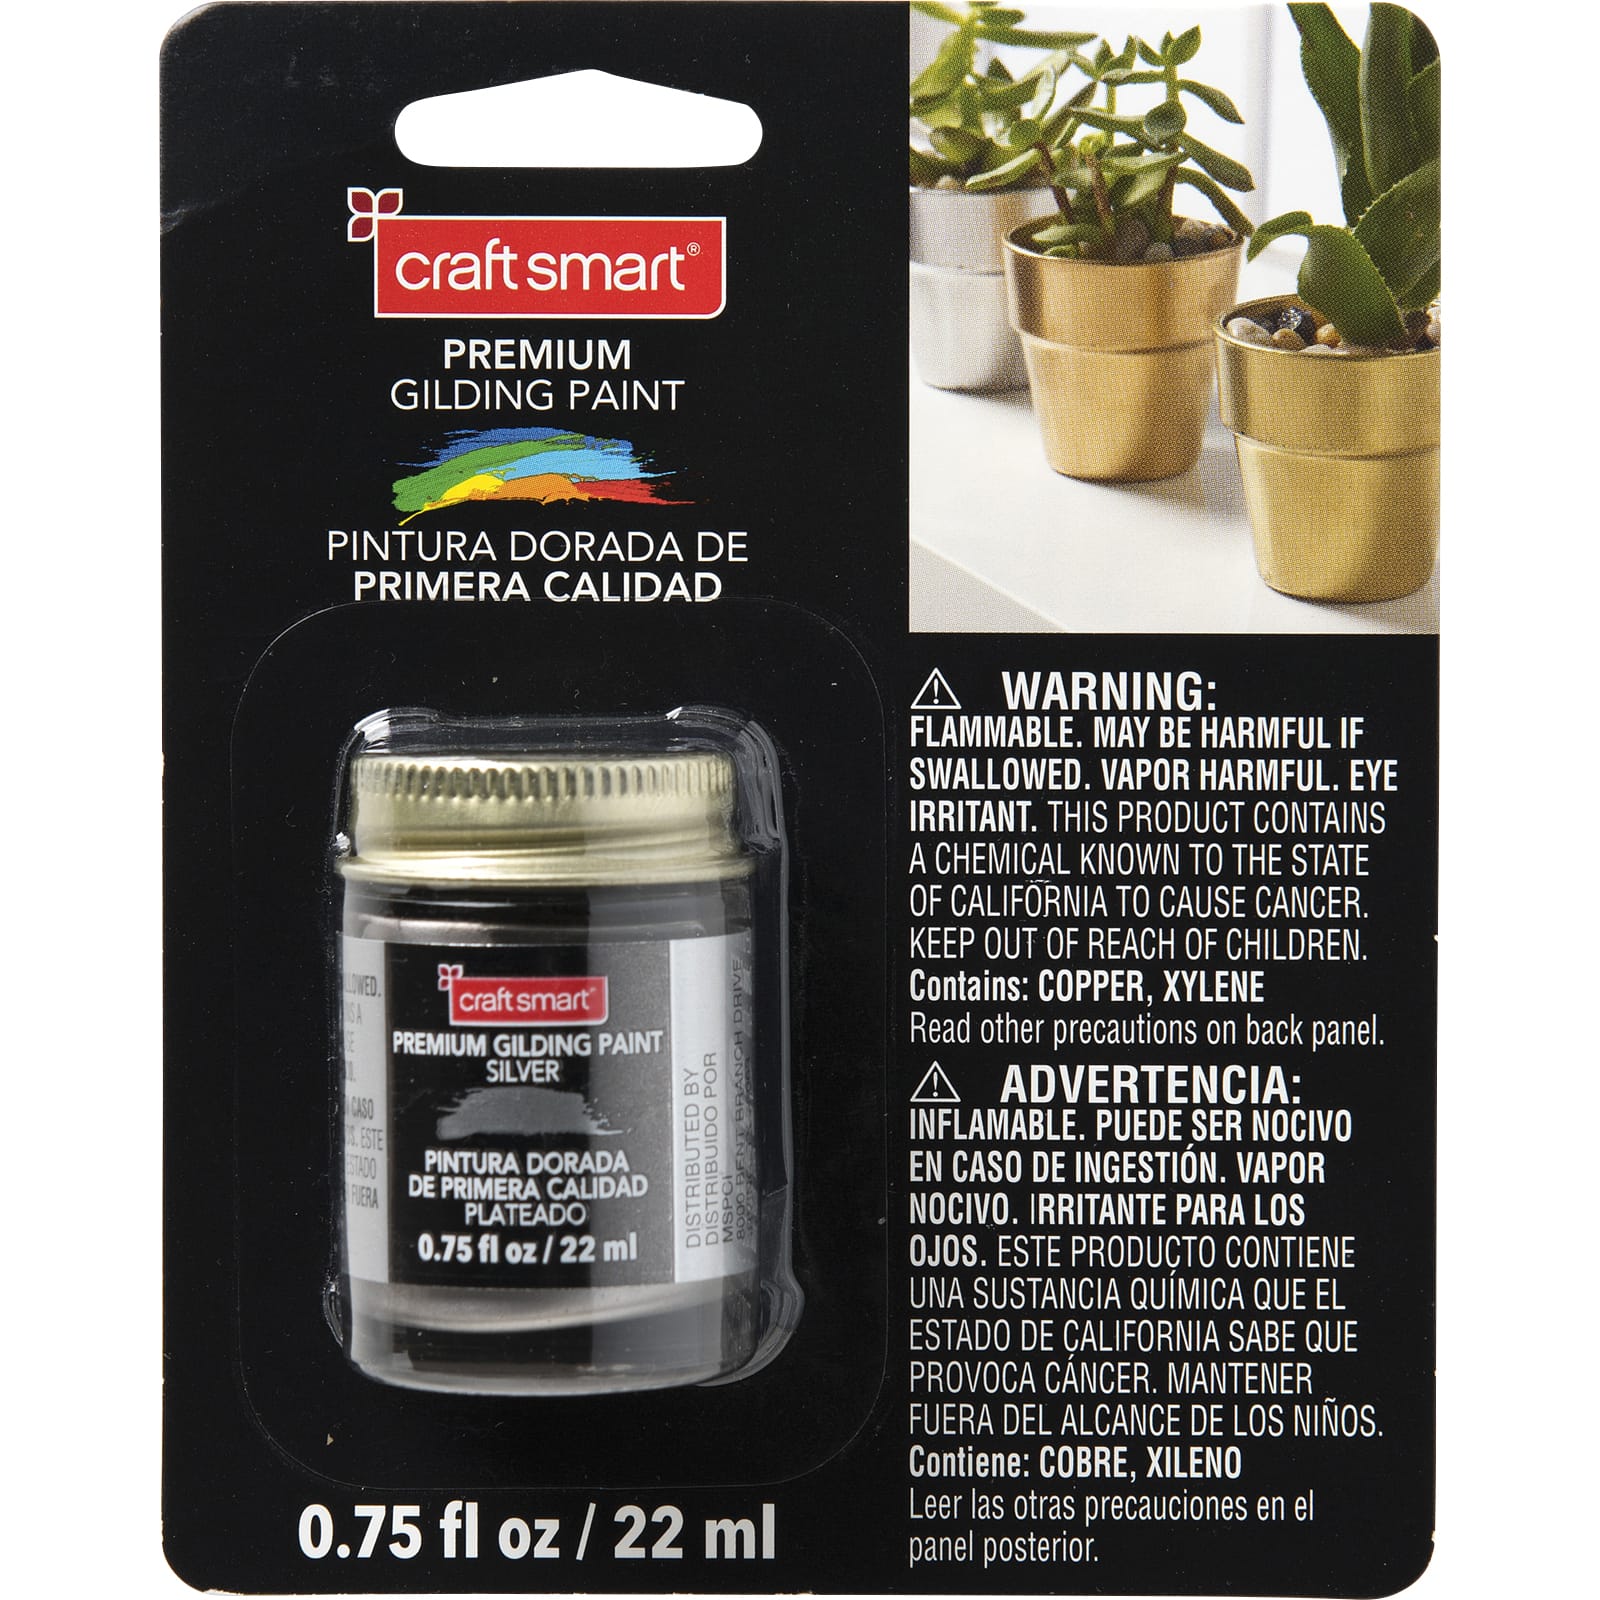  Liquid Leaf Paint One Step Leafing Paint, 0.75-Ounce, Original  (Classic Gold) : Arts, Crafts & Sewing